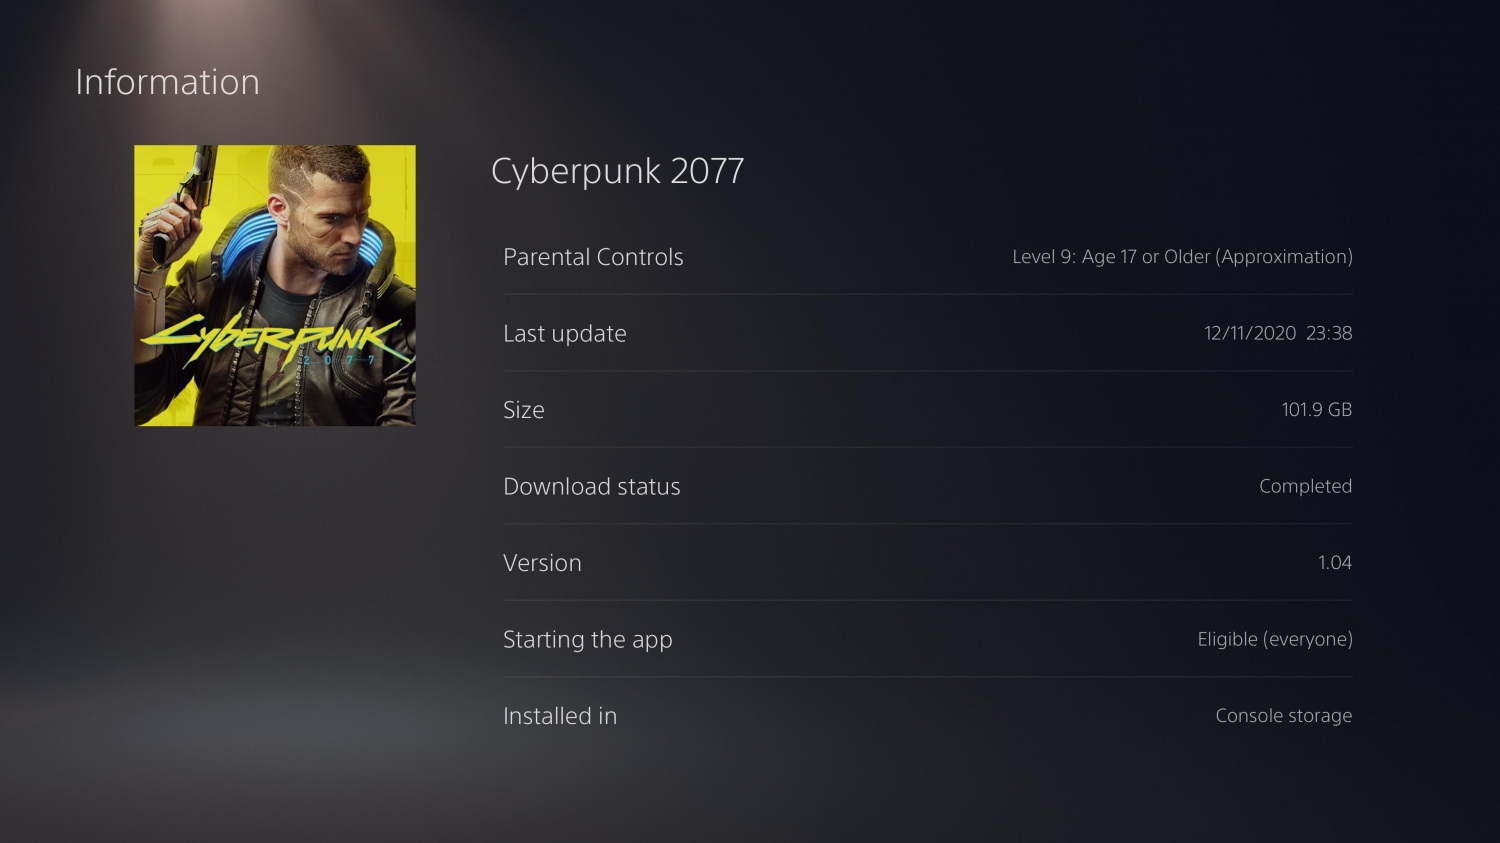 Skifte tøj Terapi udluftning Cyberpunk 2077 is over 100GB on PS4, takes up 15%